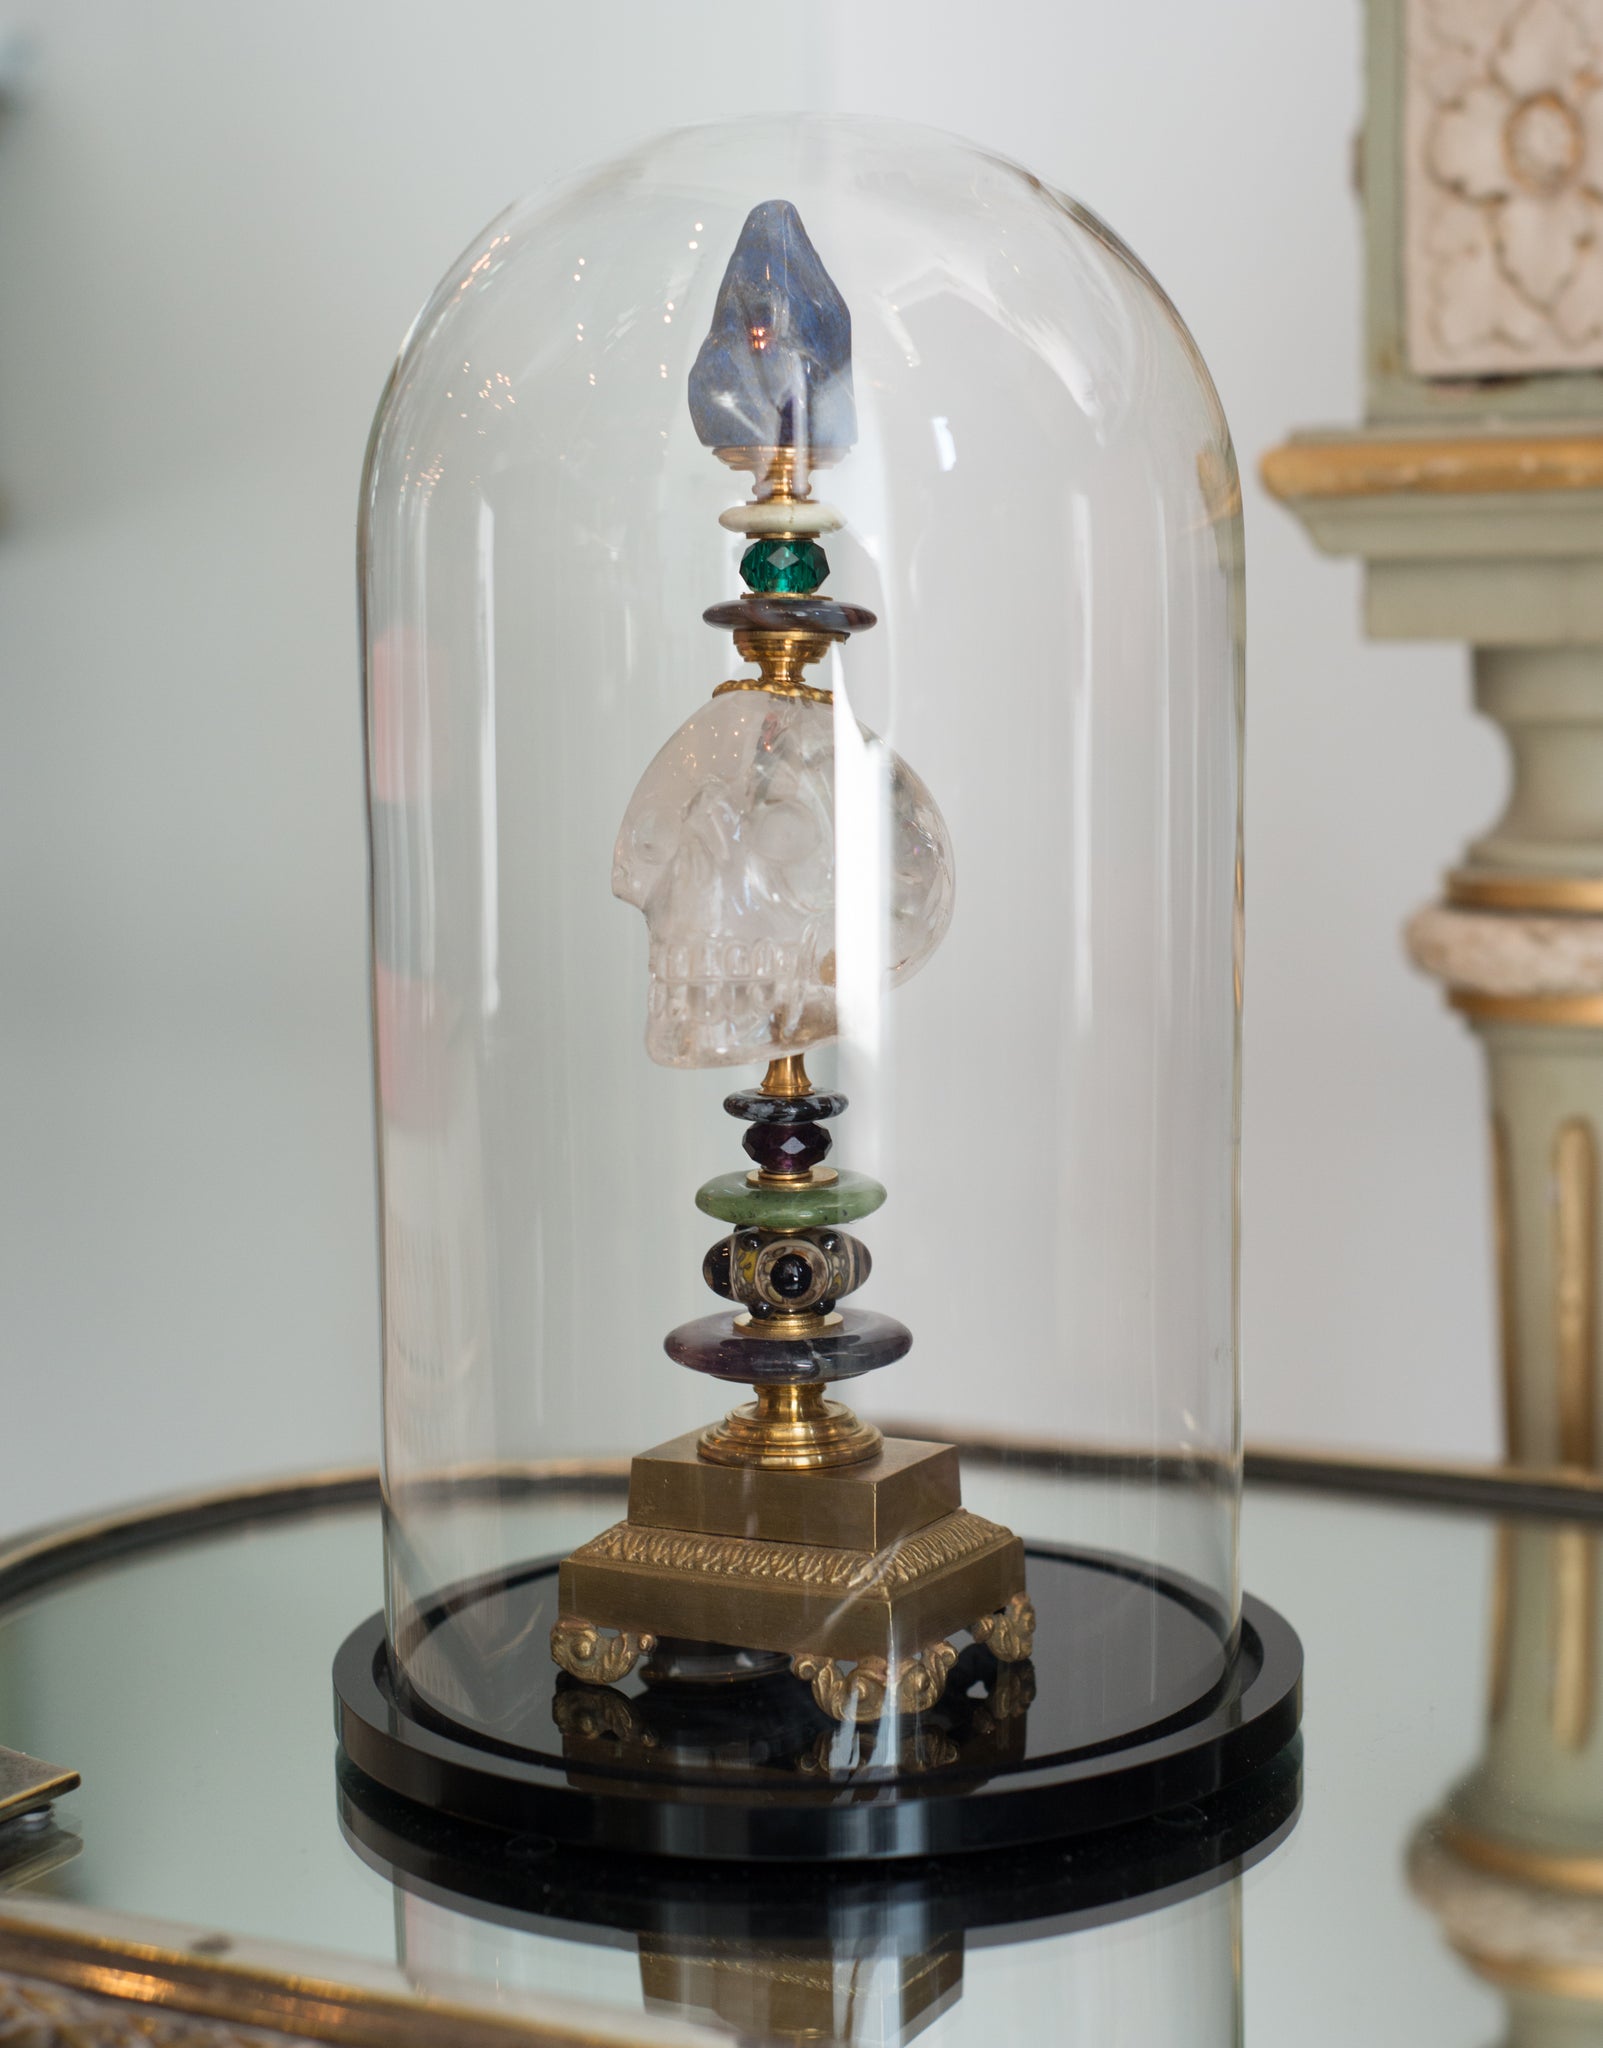 A one of a kind sculptural objet consisting of a carved Rock Crystal skull with  semi-precious stones and antique bronze components on a bronze pedestal by German artist, Dupont. At Maison Nurita we try and elevate our accessories by placing them on a cube or enclosing them in a dome.